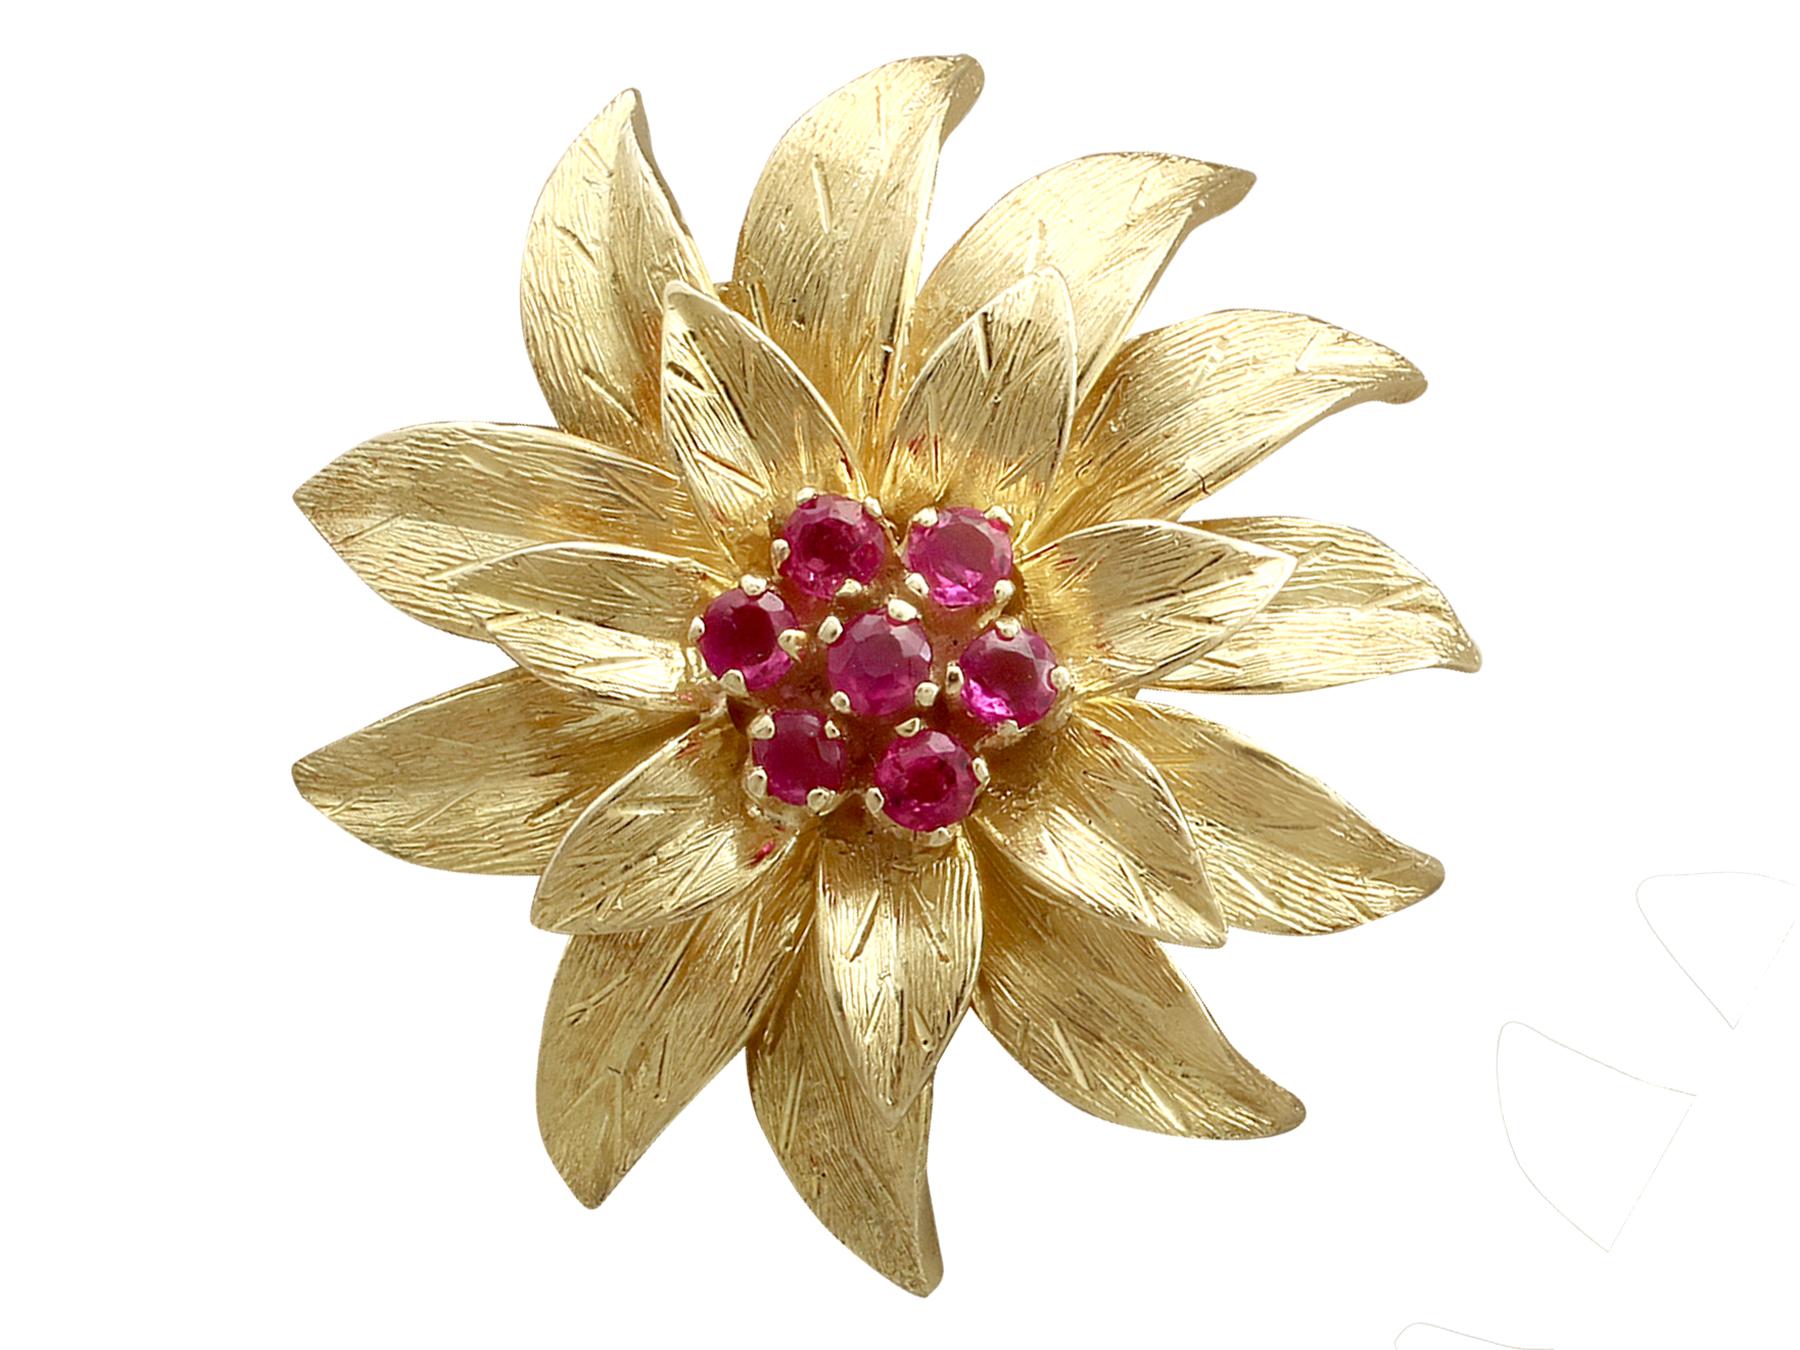 An impressive pair of vintage 0.48 carat ruby and 18 carat yellow gold floral earrings; part of our diverse gemstone jewelry collections.

These stunning, fine and impressive 18k yellow gold earrings have been modelled in the form of flowers.

Each